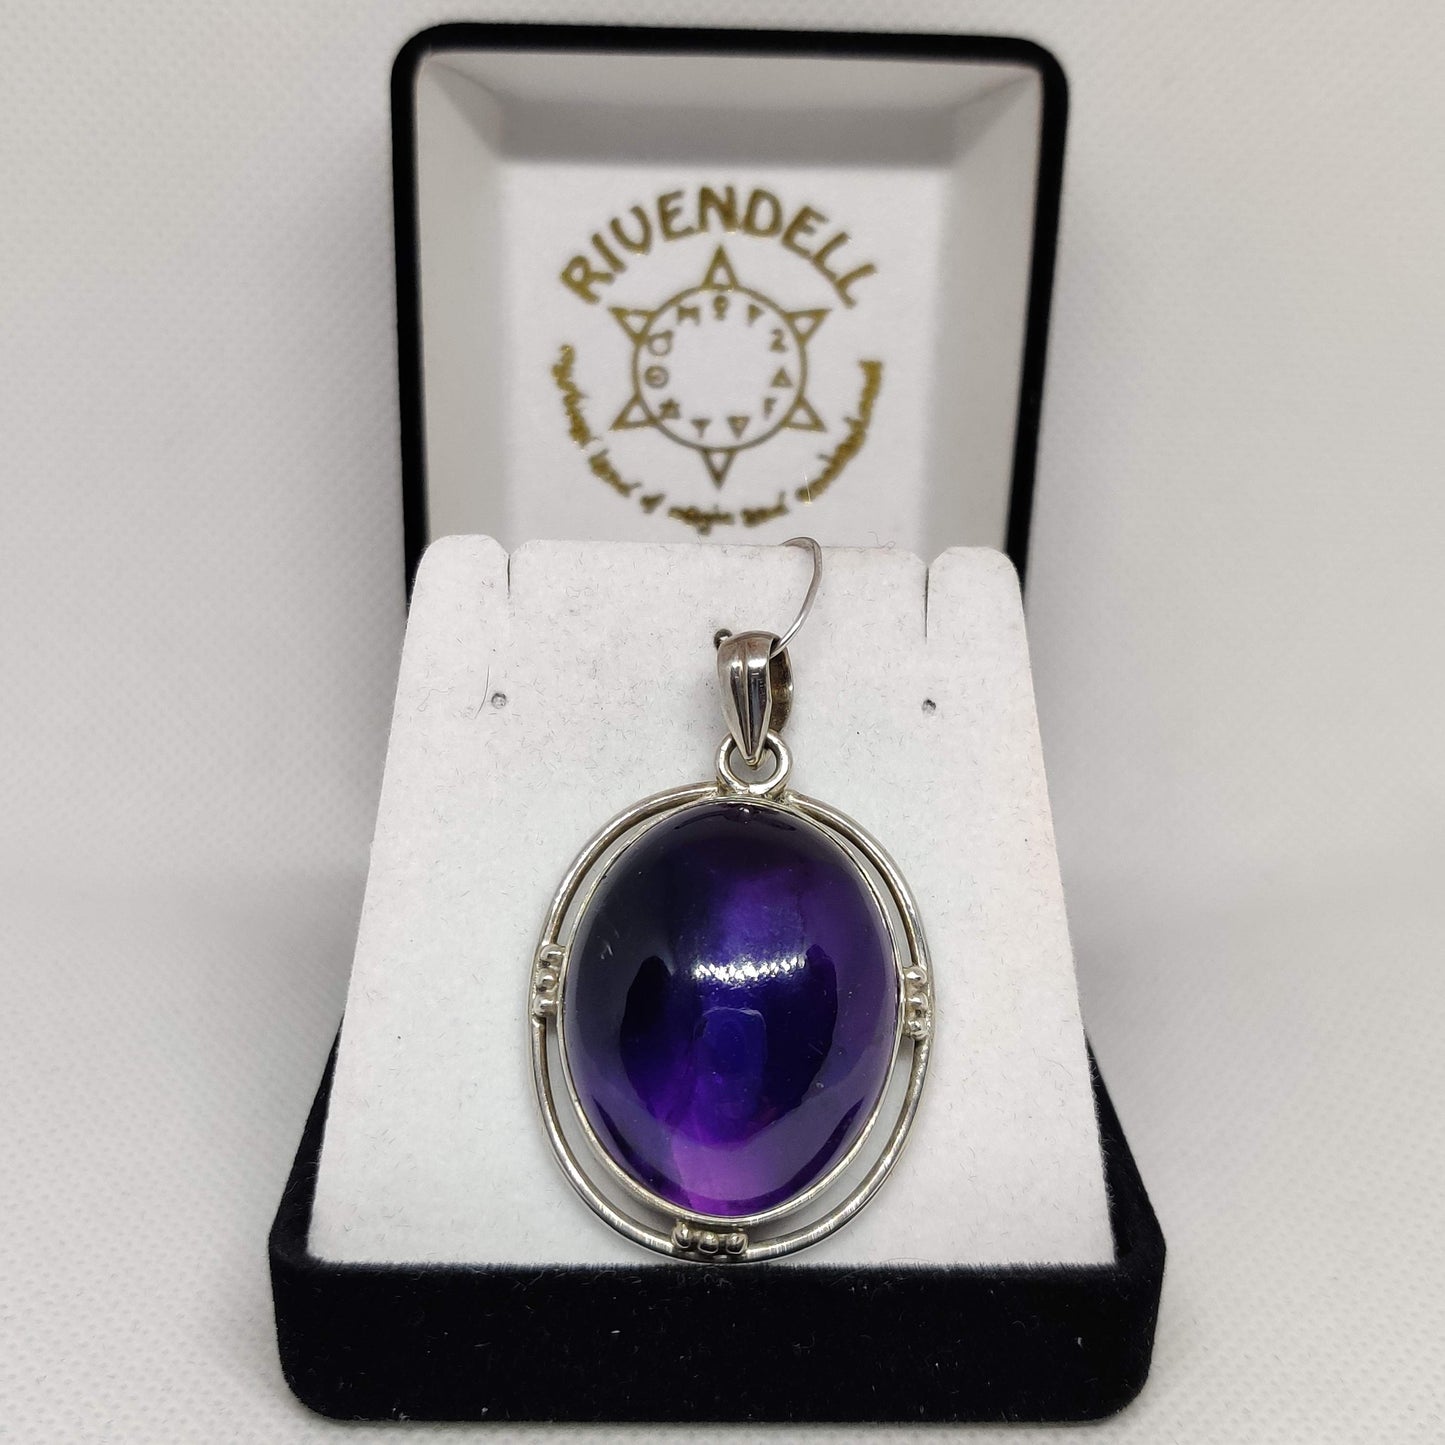 Large Oval Amethyst 925 Sterling Silver Pendant with double bezel setting - Rivendell Shop